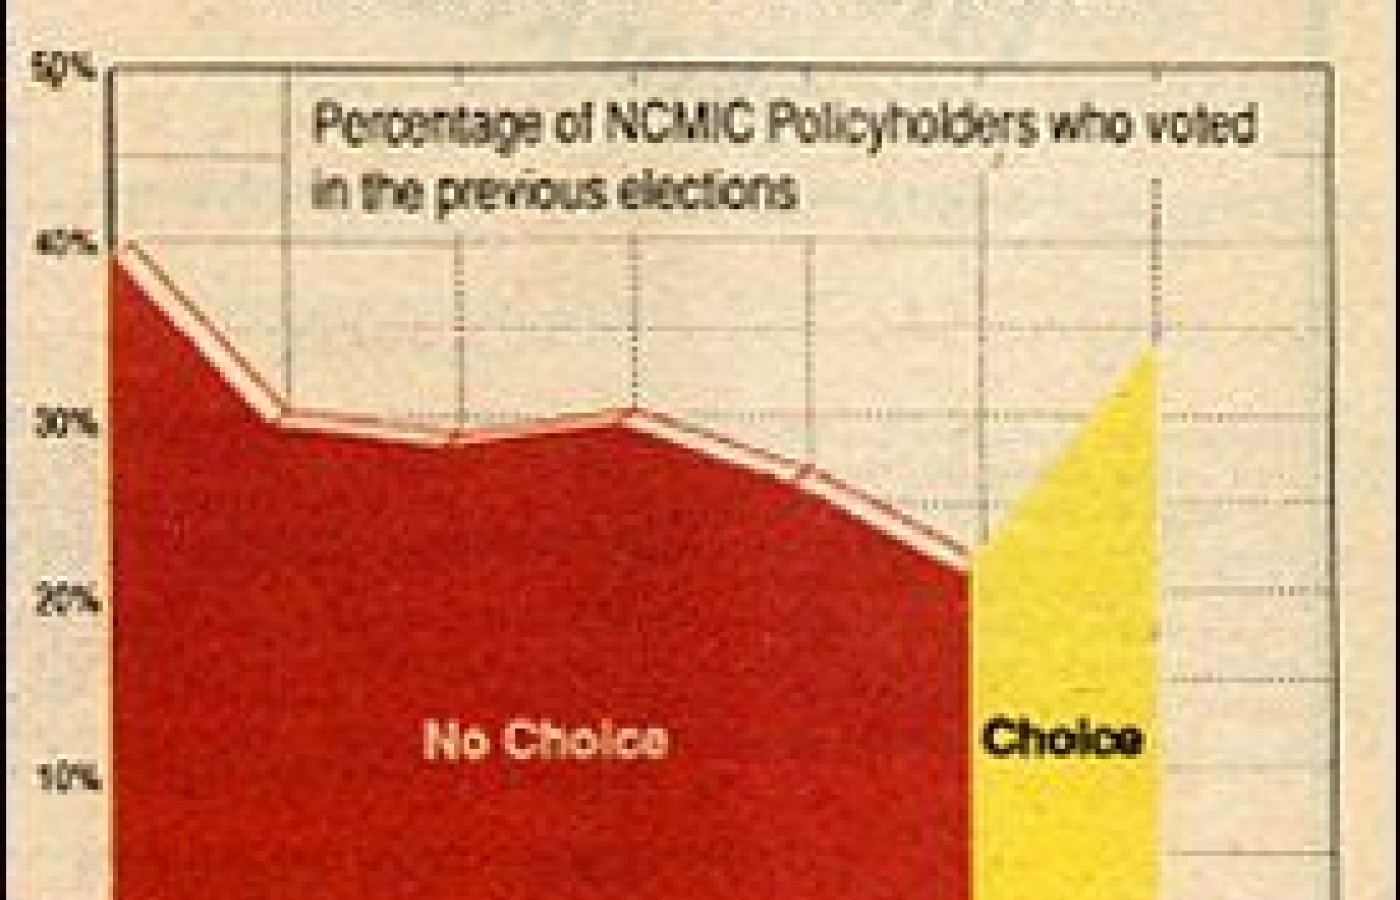 Graph of the percentage of NCMIC policyholders who voted in the previous elections